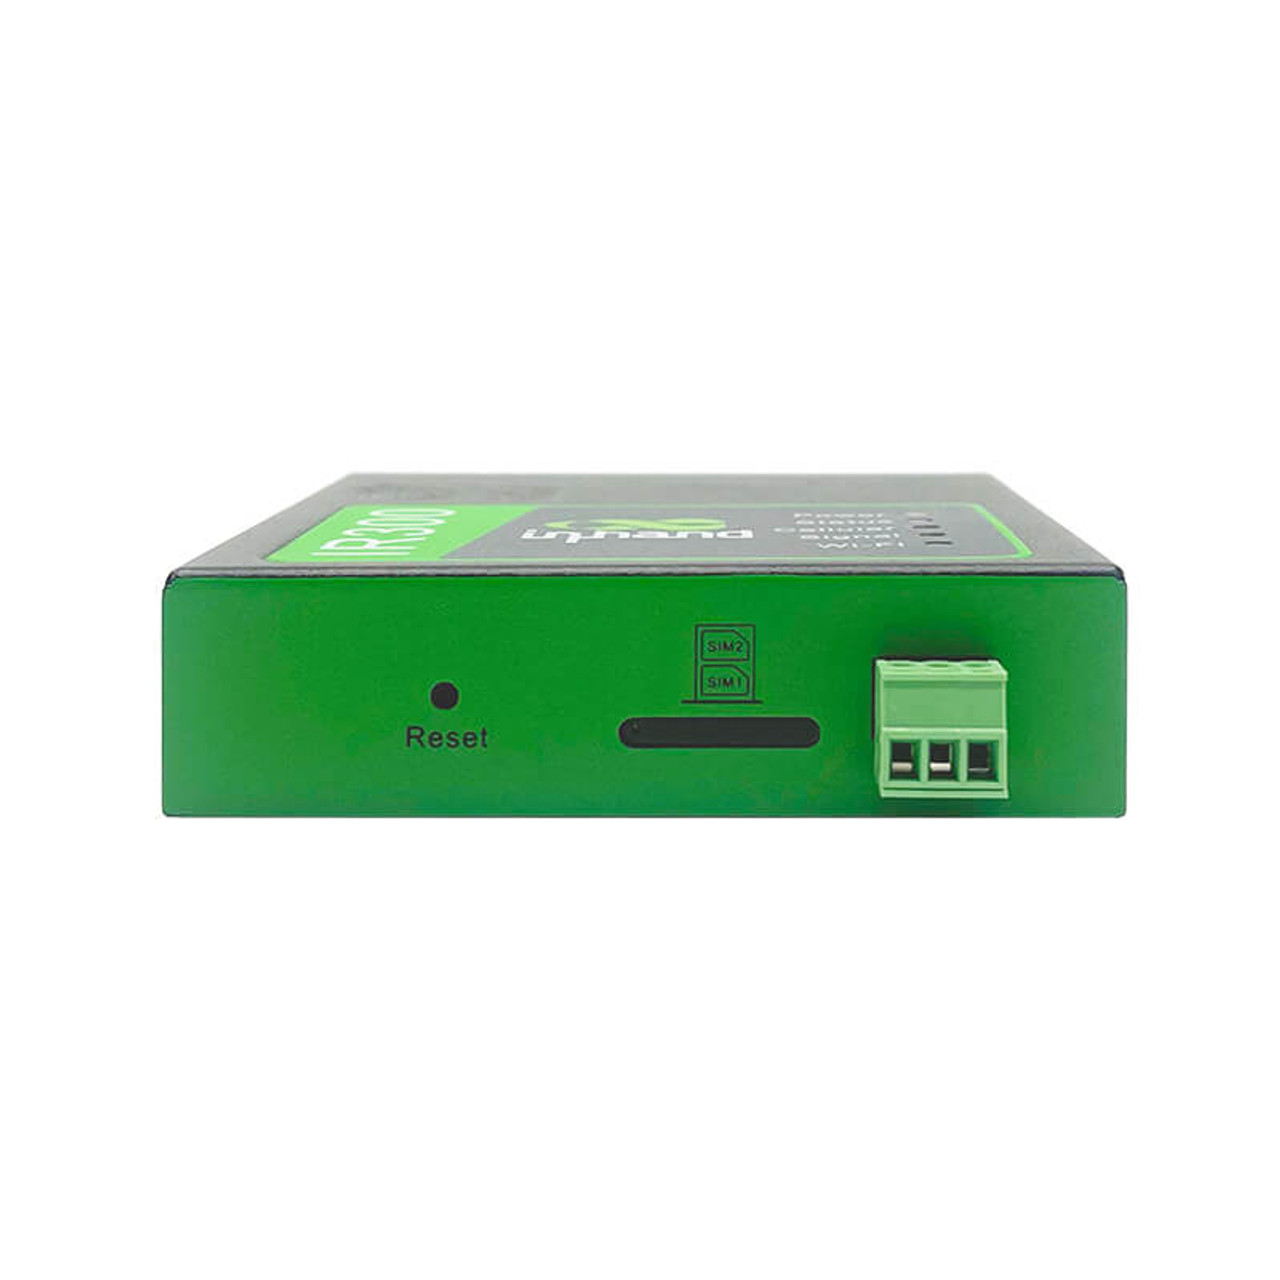 Shop Inhand Networks Industrial LTE CAT4 Routers